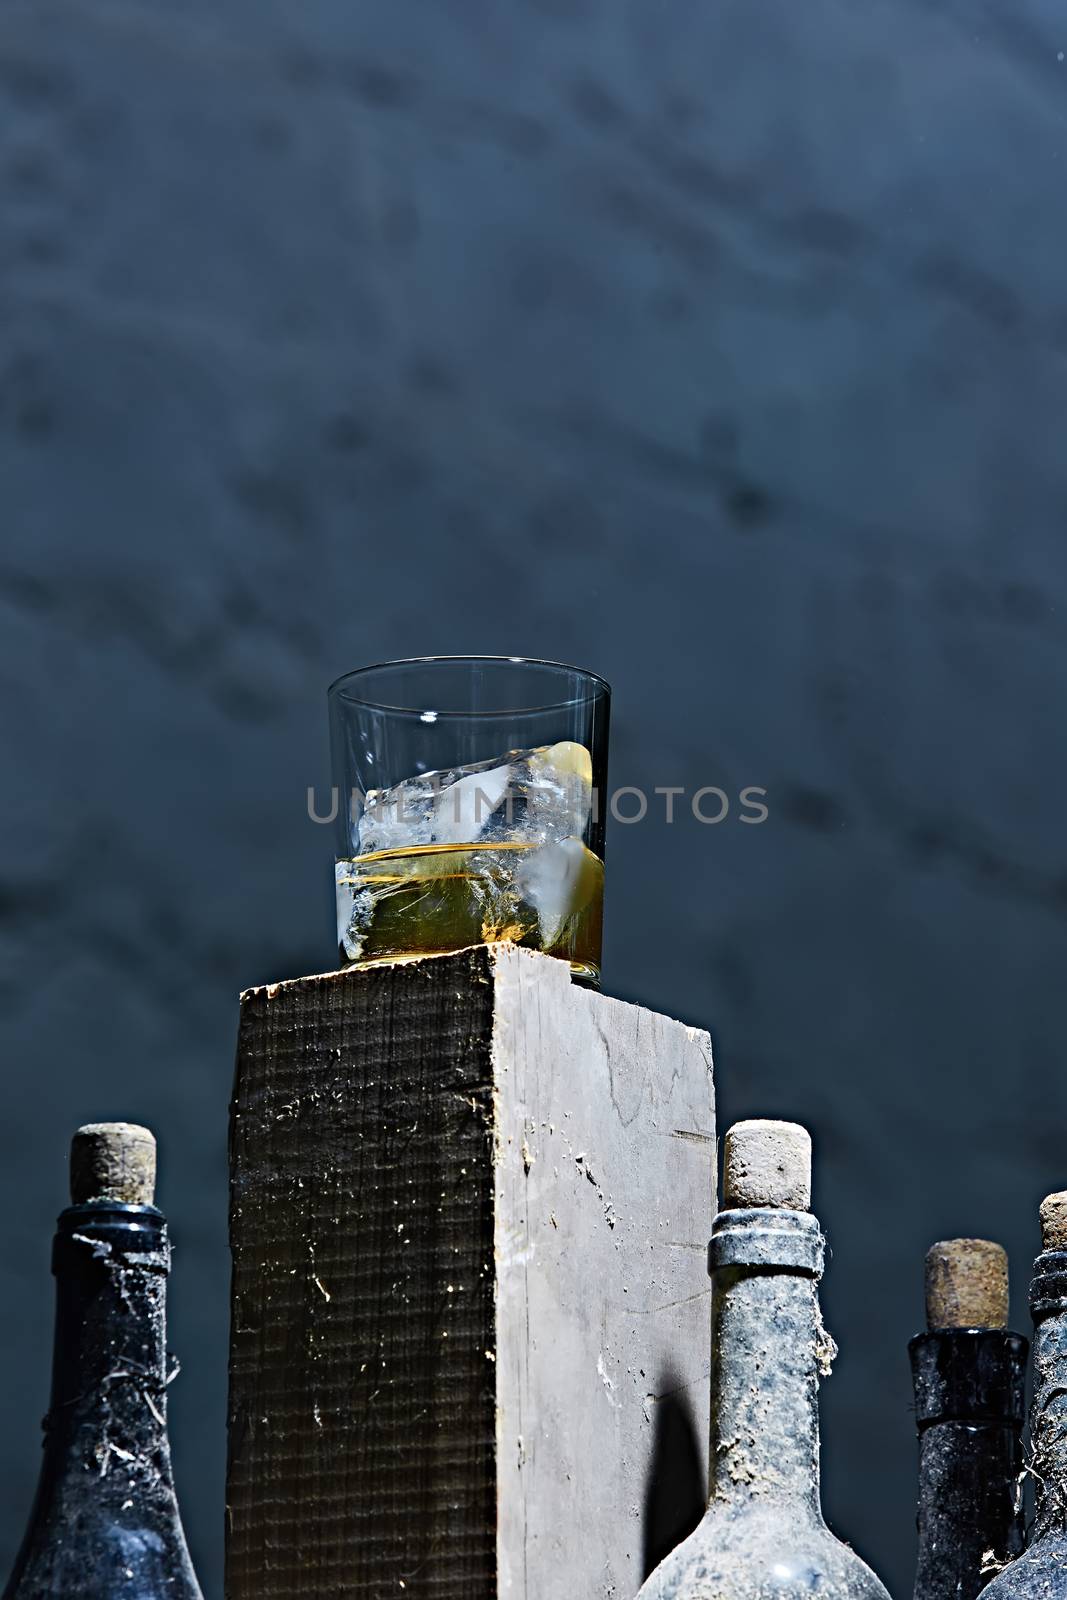 A glass of whiskey with ice on old wooden bar around the old bottles. Shallow dof